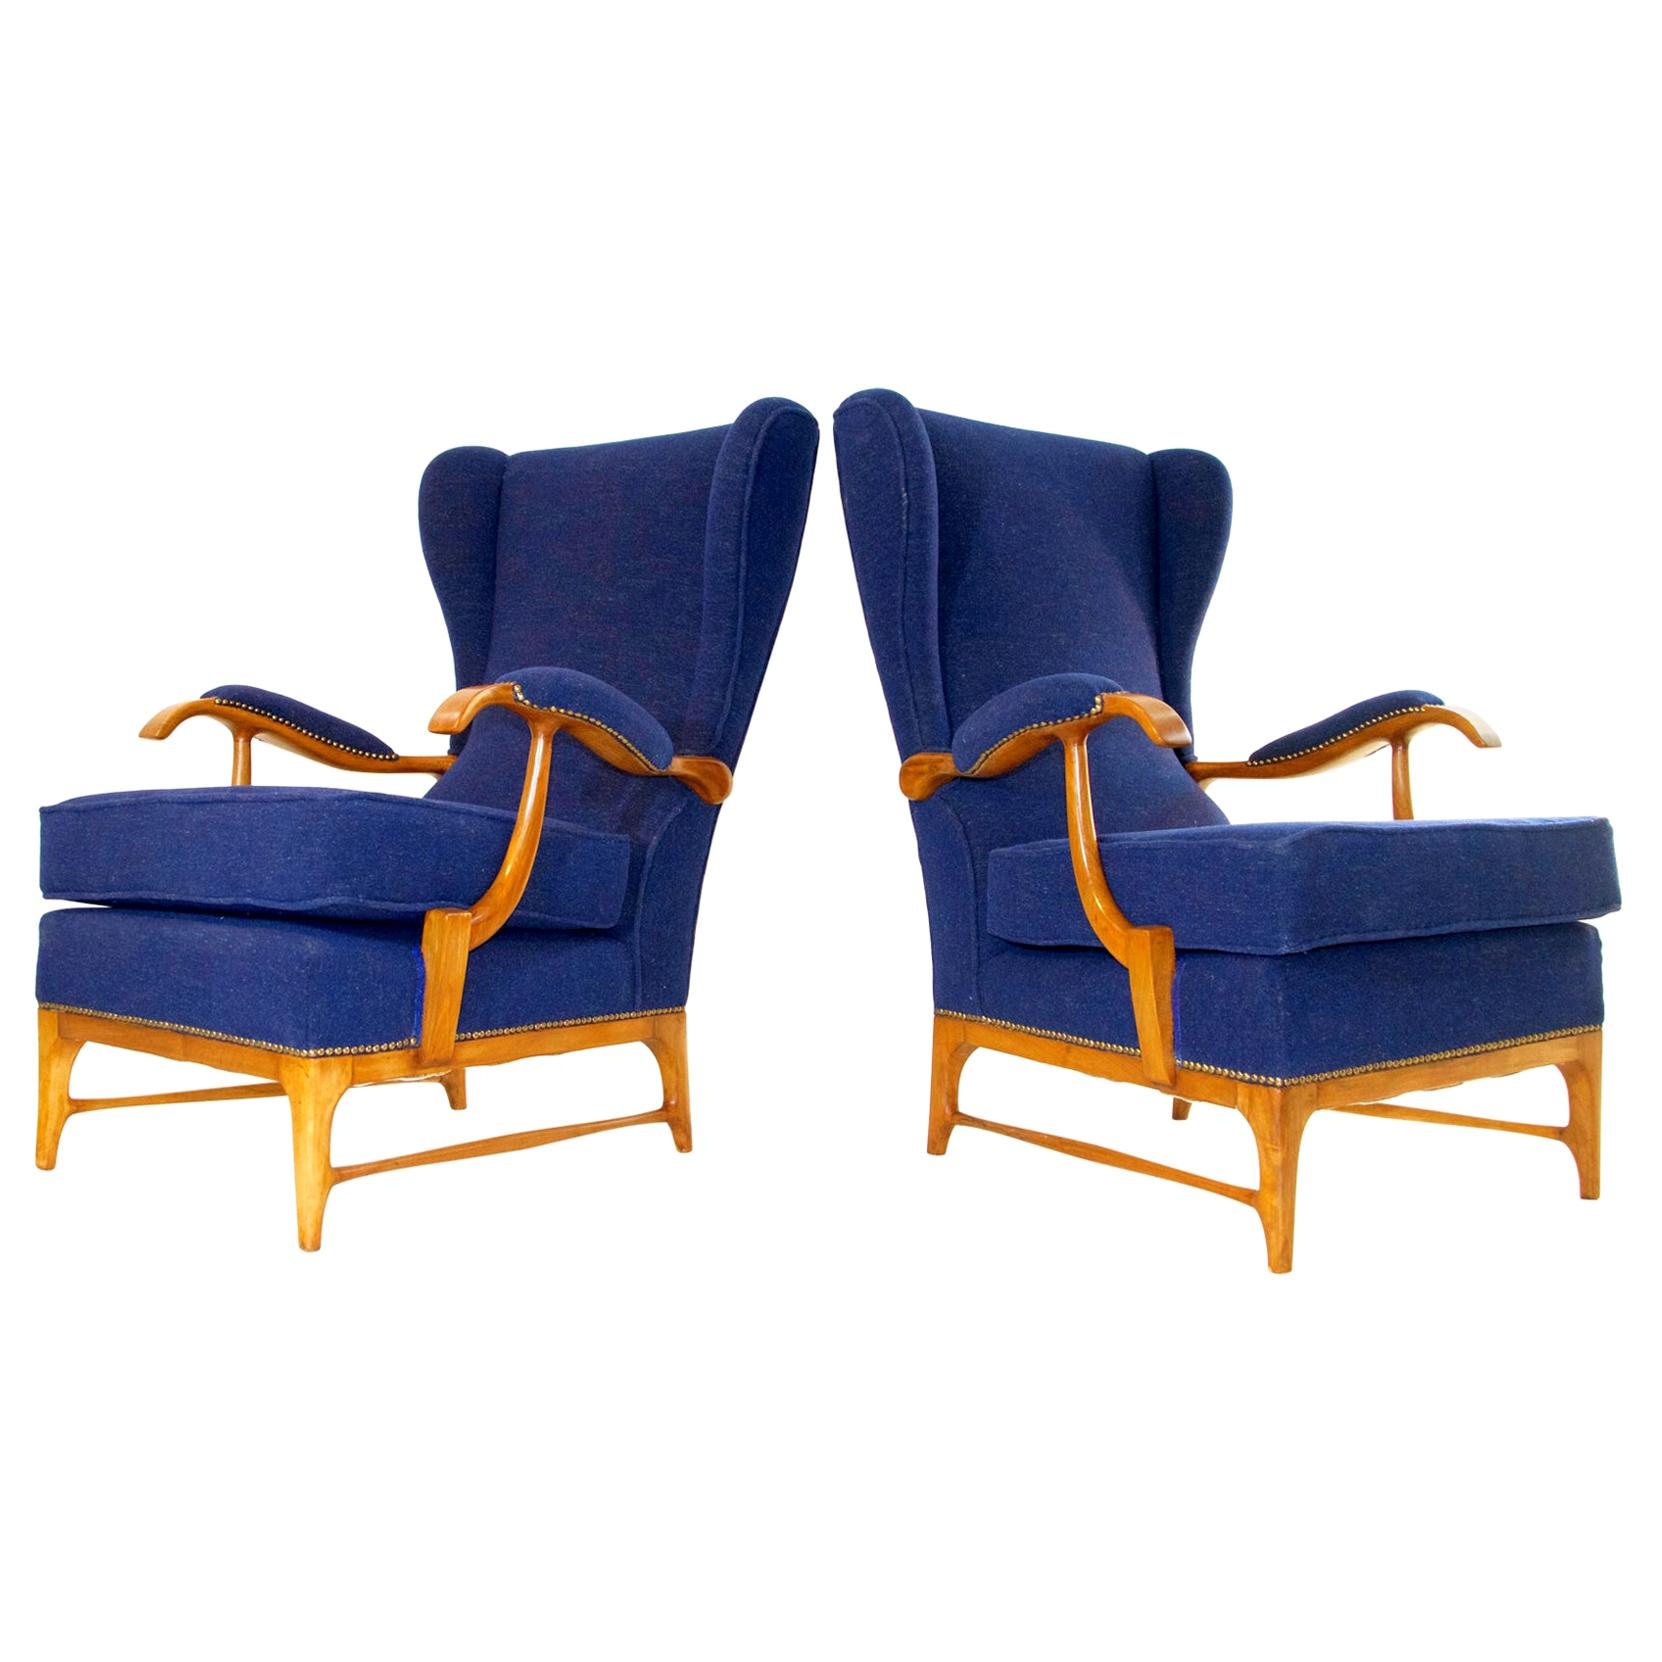 Midcentury Pair of Armchairs in Walnut by Paolo Buffa for Framar Made in Italy For Sale